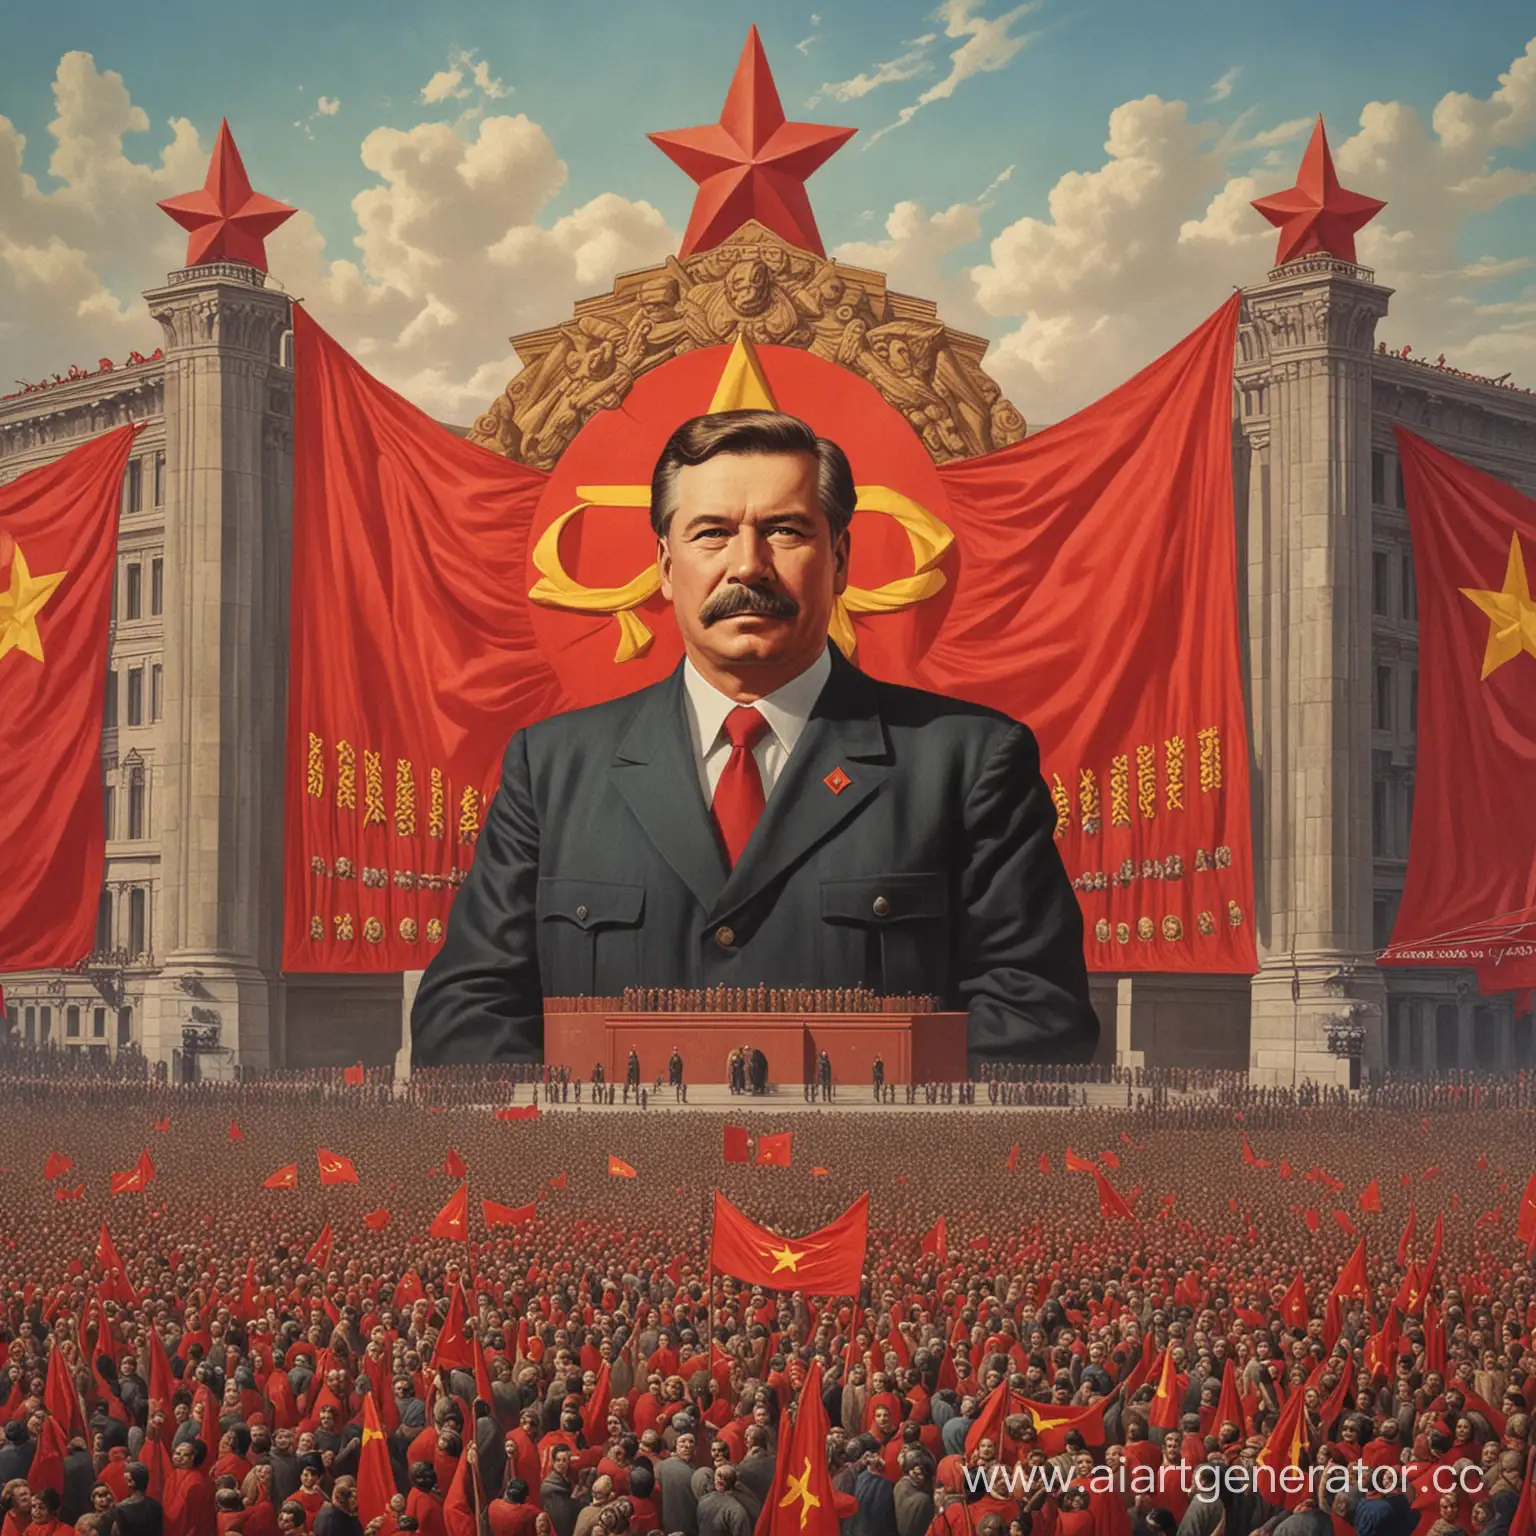 Celebrating-the-Ideals-Vibrant-Tribute-to-the-Greatness-of-Communism